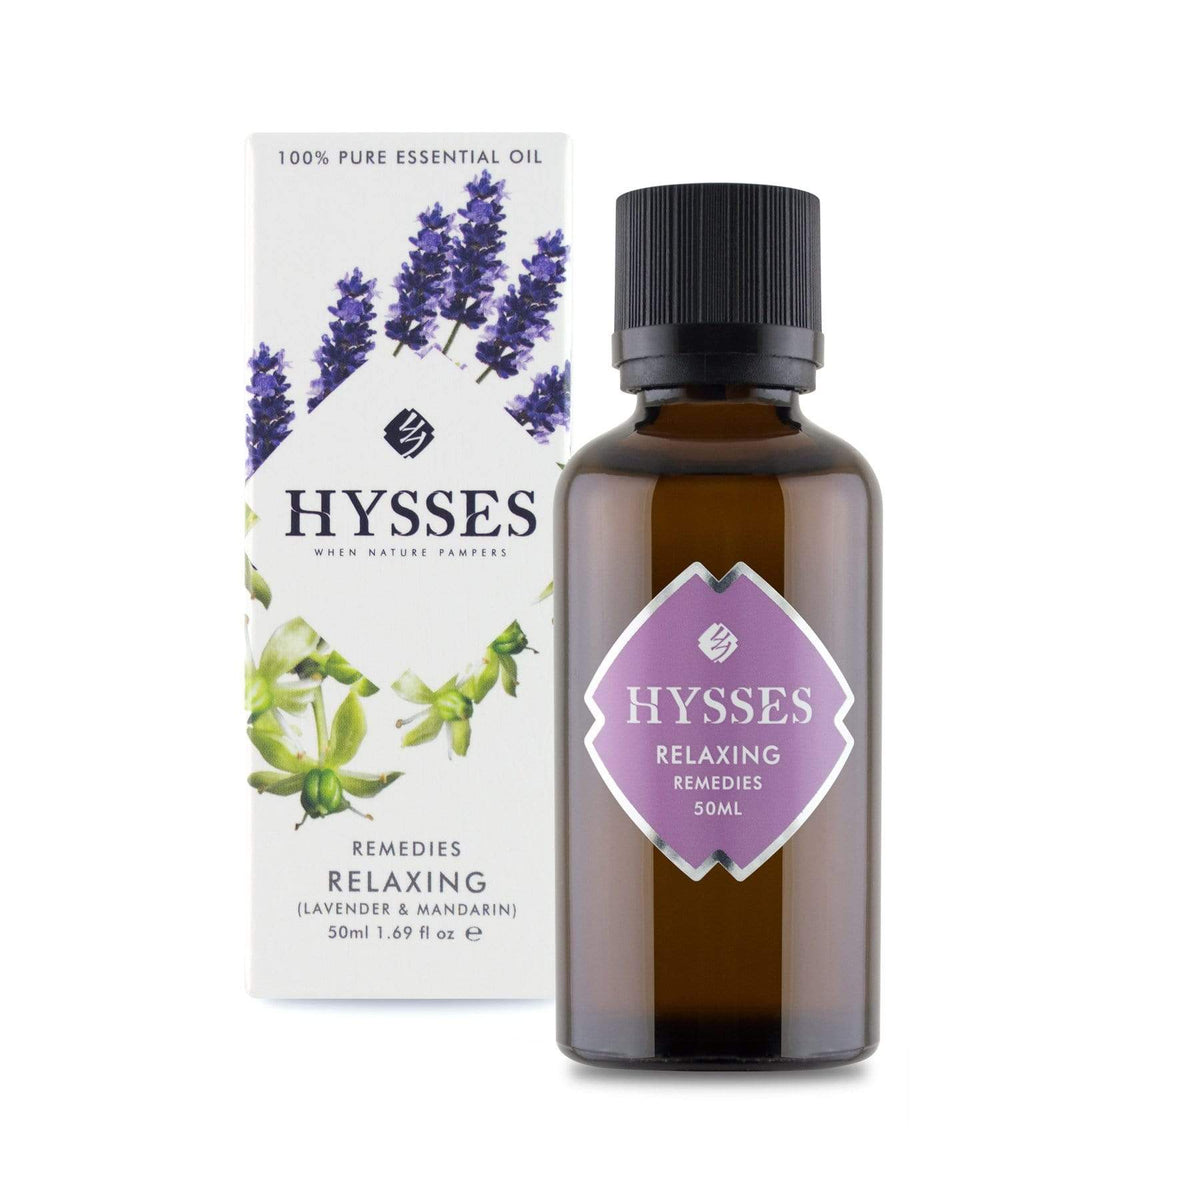 Hysses Essential Oil 50ml Remedies, Relaxing